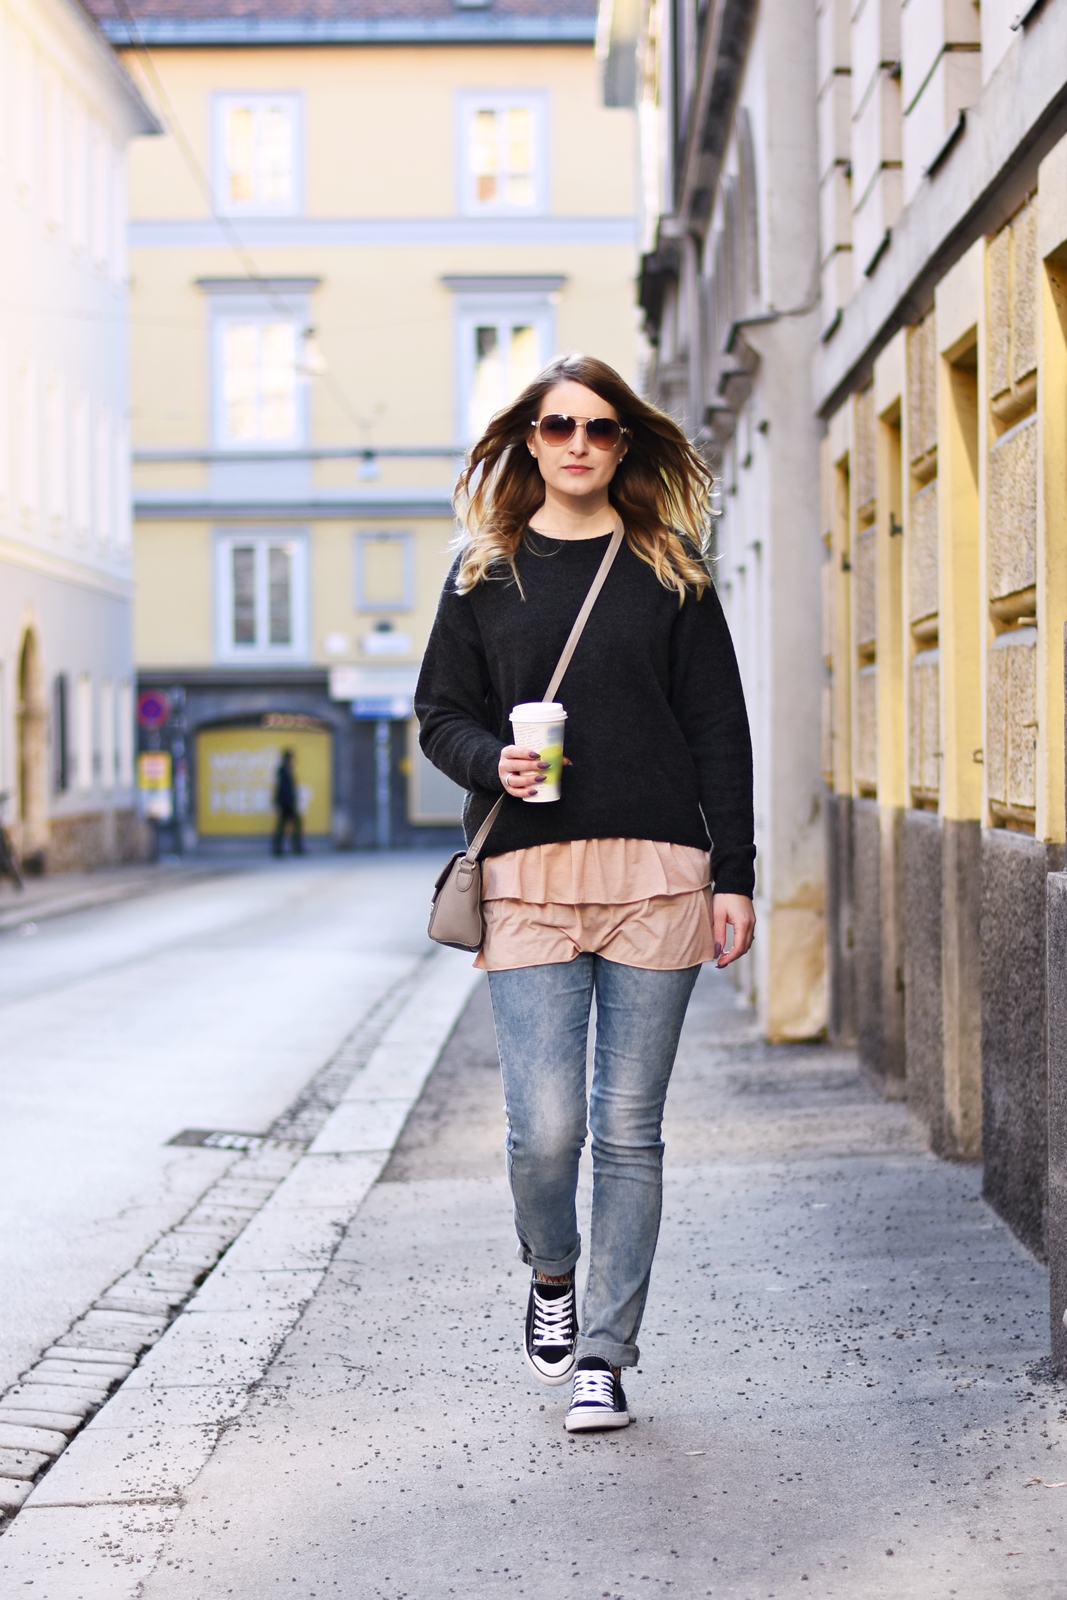 Fishnet Tights and Sneakers - Frühlingsoutfit - Spring Layering - Fashionladyloves